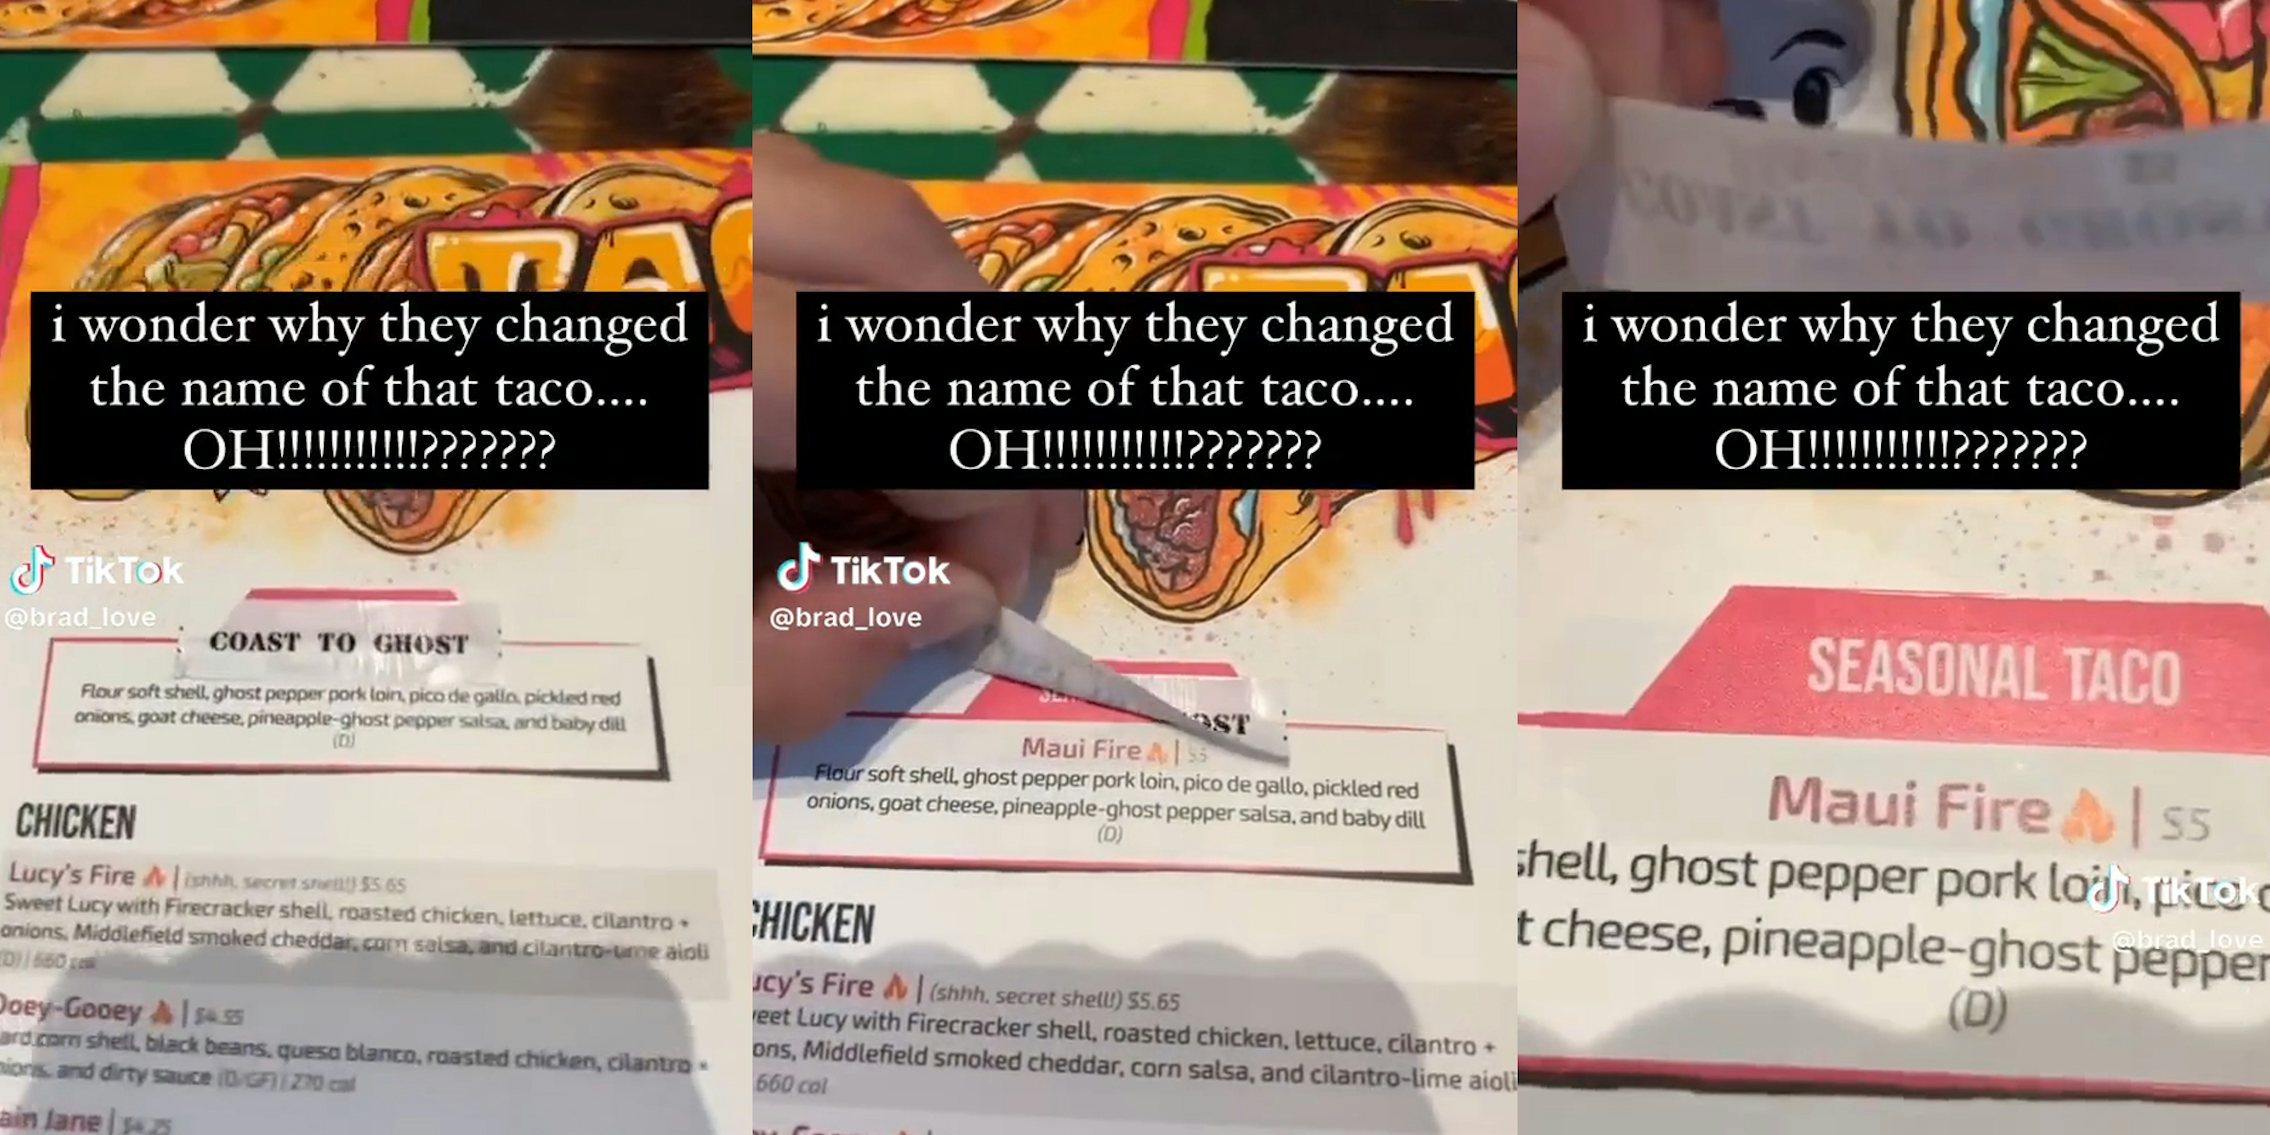 man removing 'Coast to Ghost' taped over 'Maui Fire' taco with caption 'i wonder why they changed the name of that taco.... OH!!!!????'